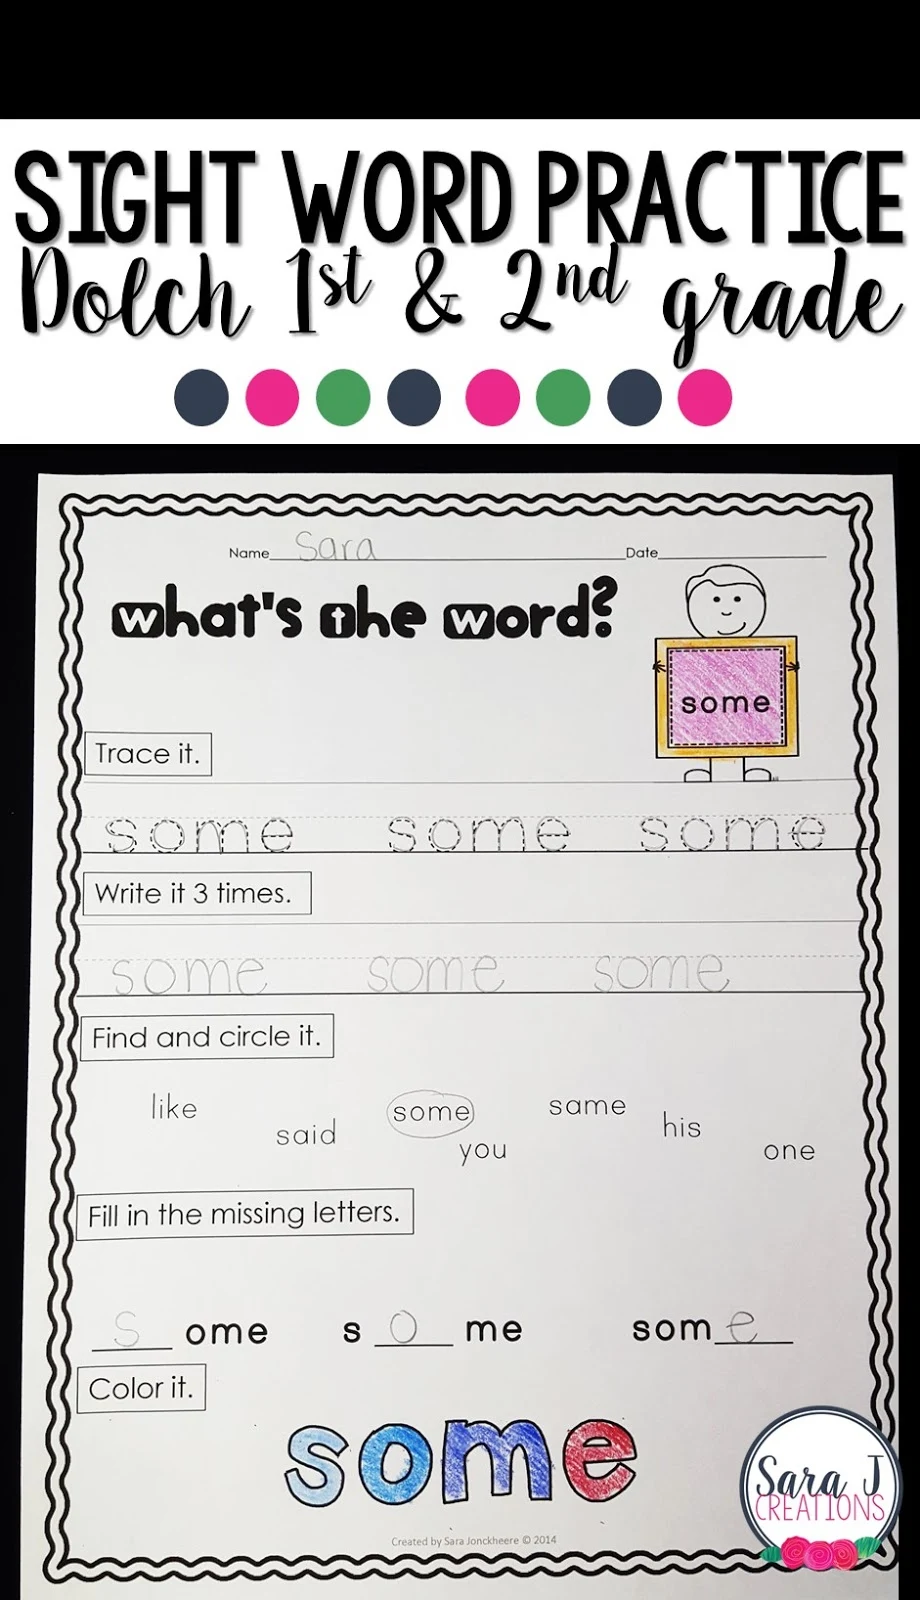 Dolch sight word practice printables are an easy way to have students practice tracing, writing, identifying and coloring words.